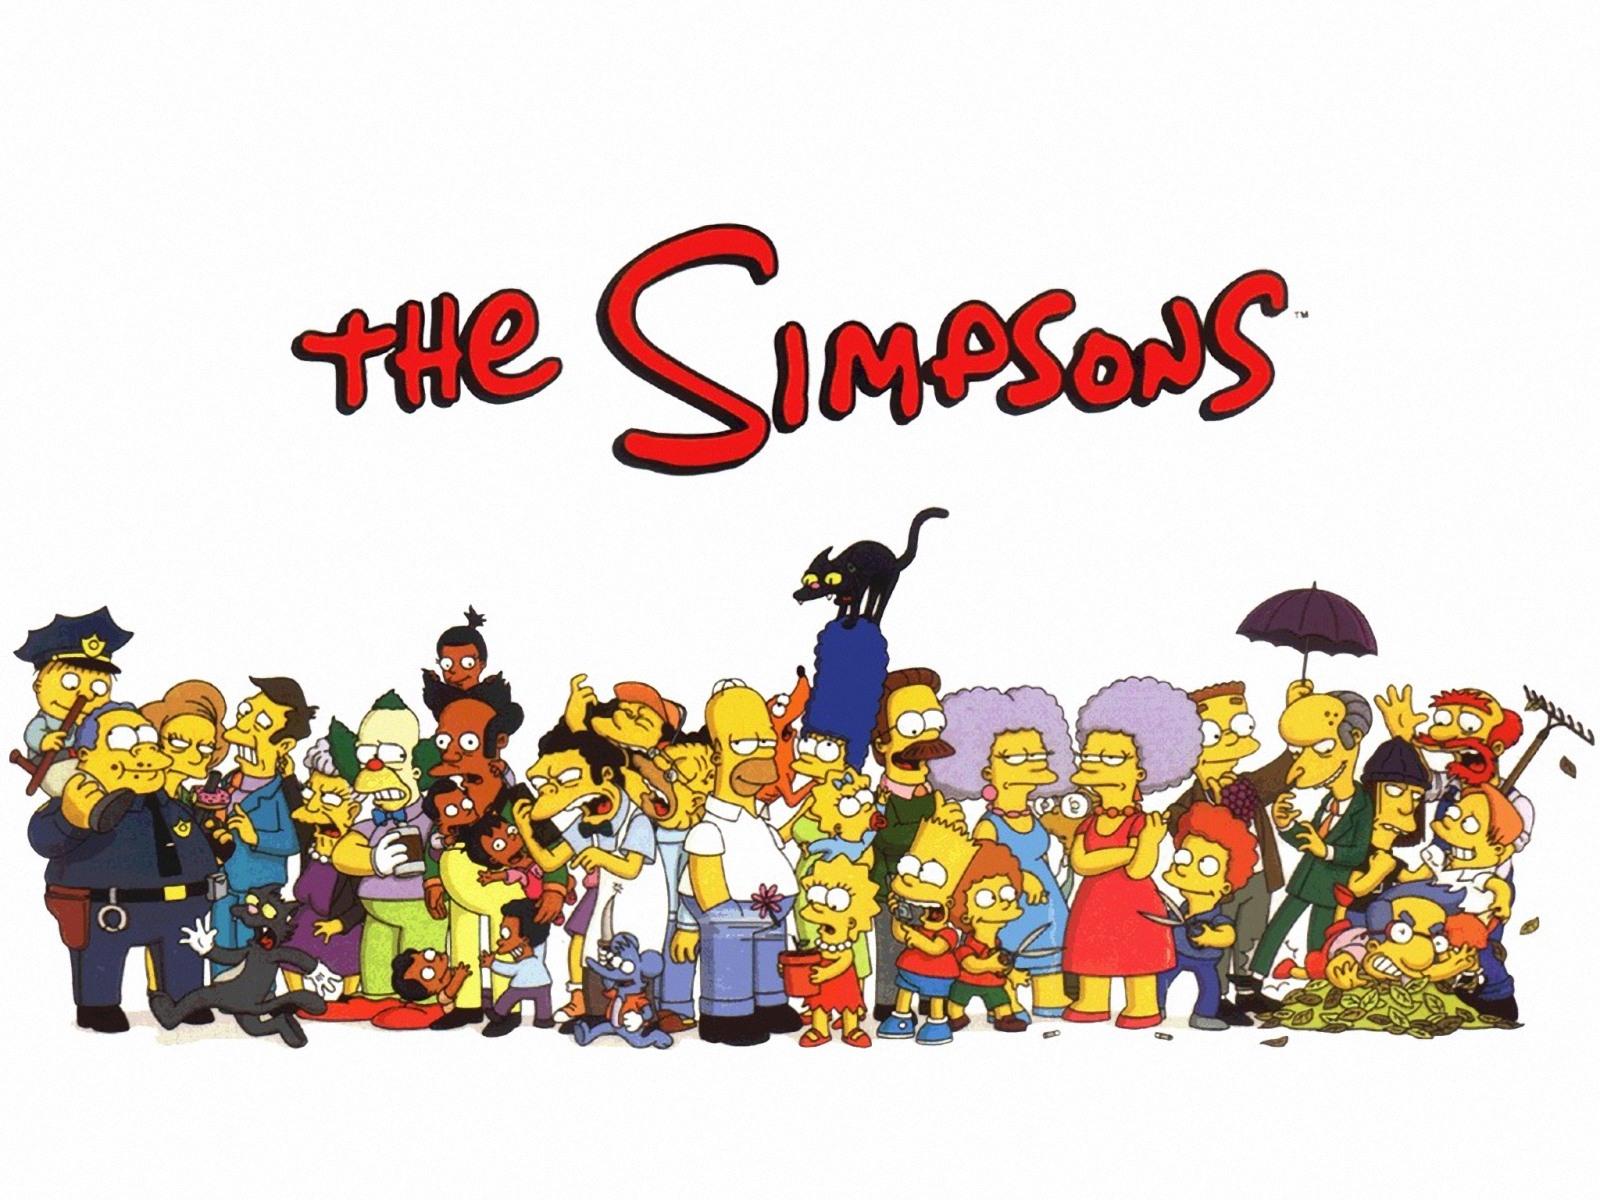 Download The Simpsons Computer Wallpaper 48977 1600x1200 px High